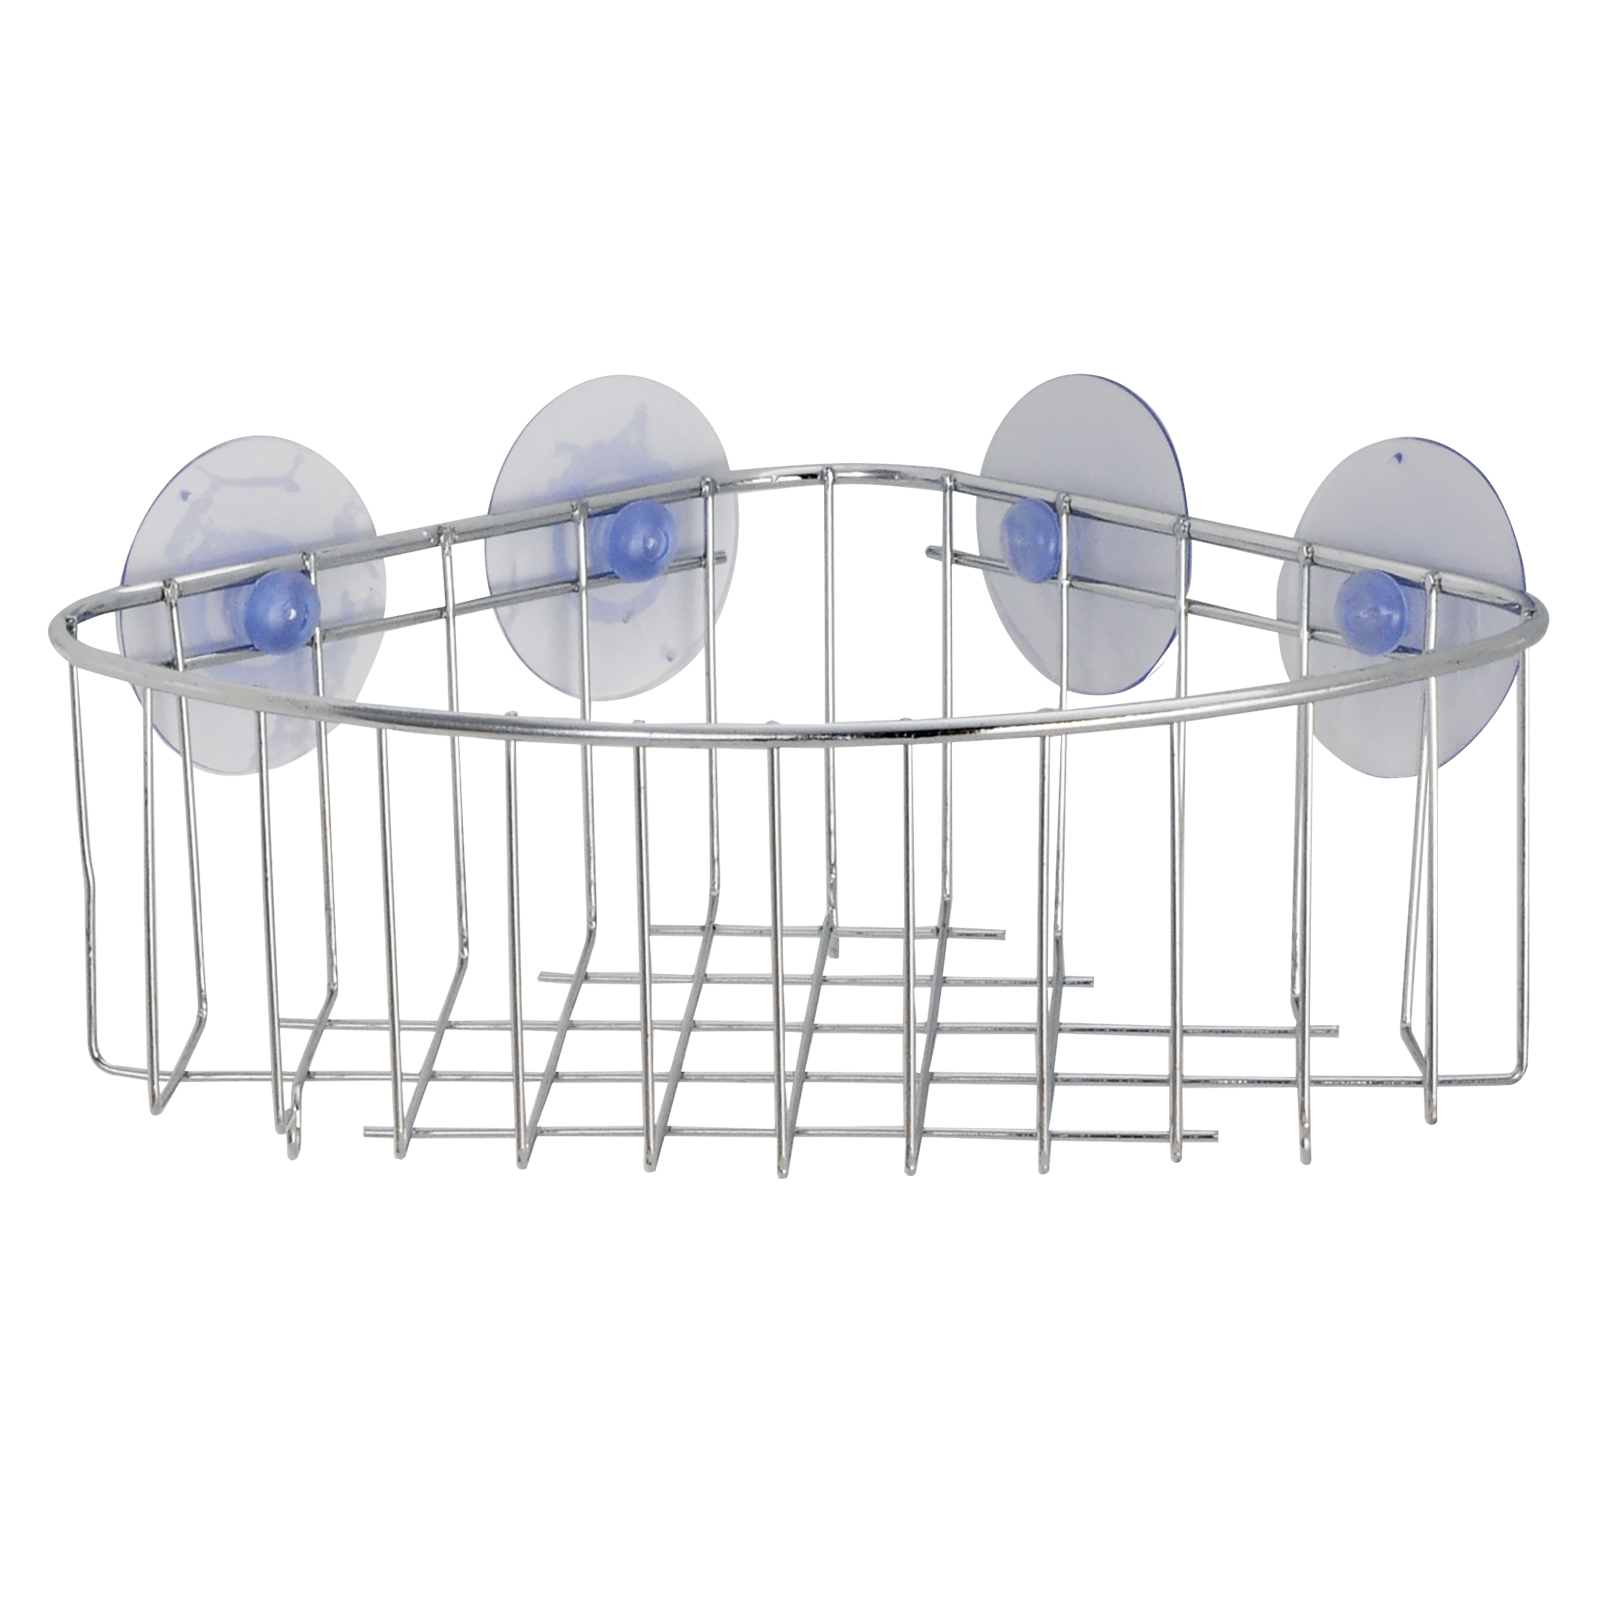 0019442516185 - WIRE CORNER BASKET FOR THE SHOWER OR WALL WITH 4 SUCTION CUPS CHROME FINISH